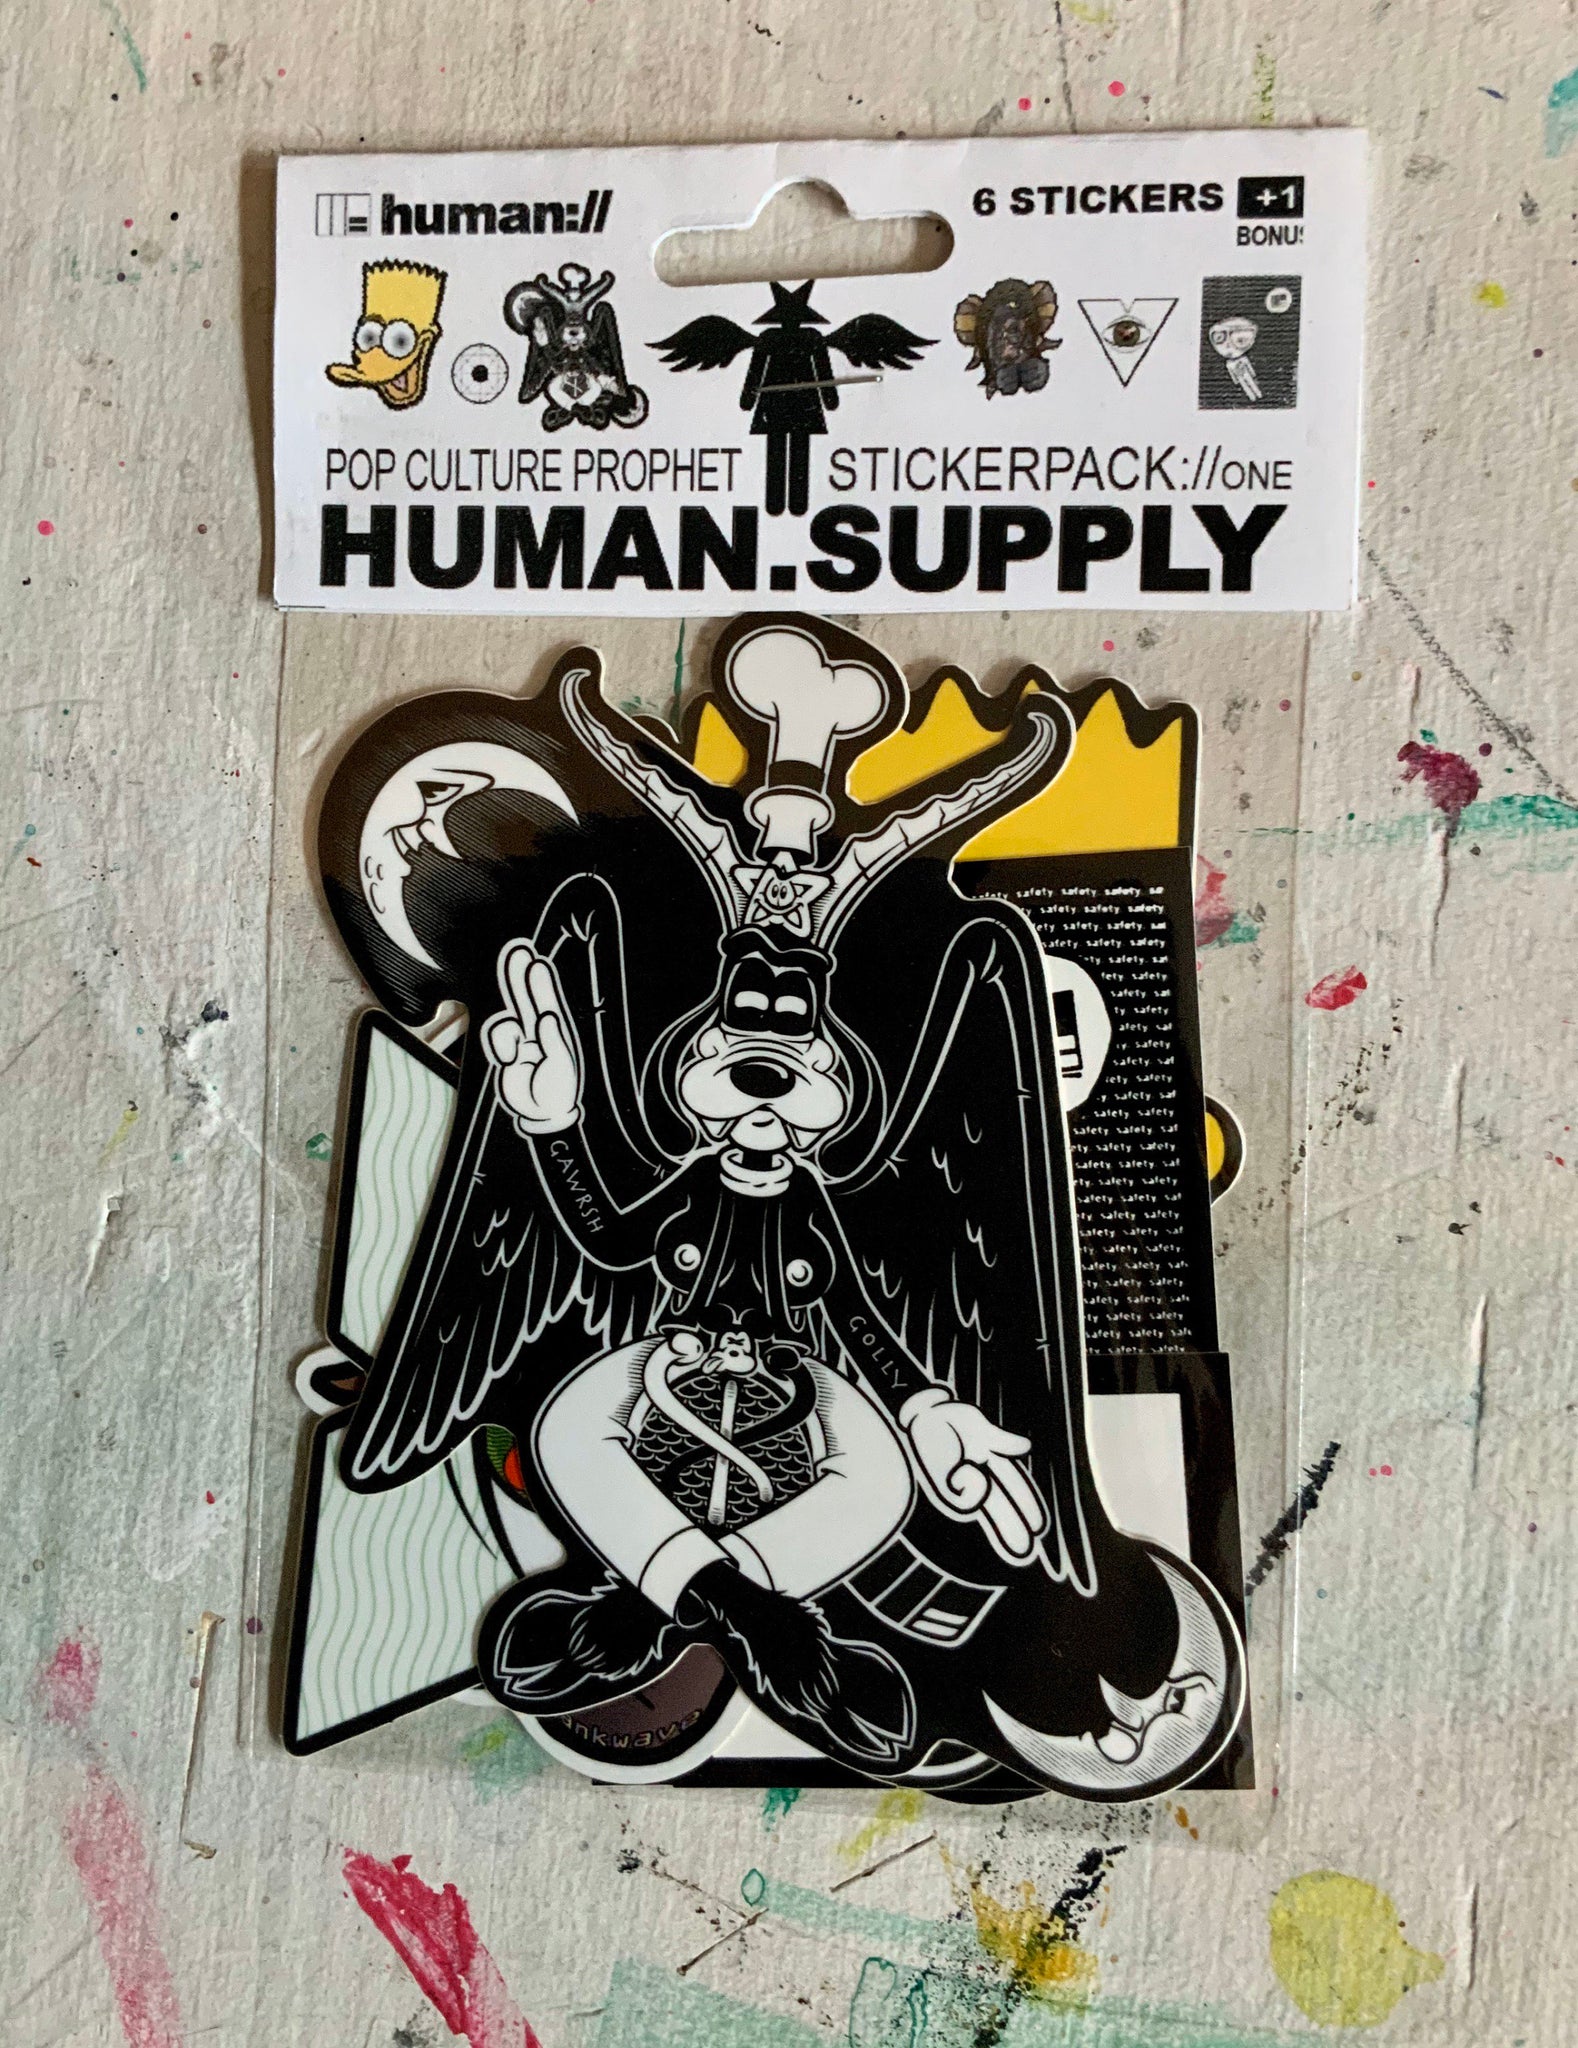 HUMAN.SUPPLY Pop Culture Prophet occult sticker pack one (6 stickers + freebie)